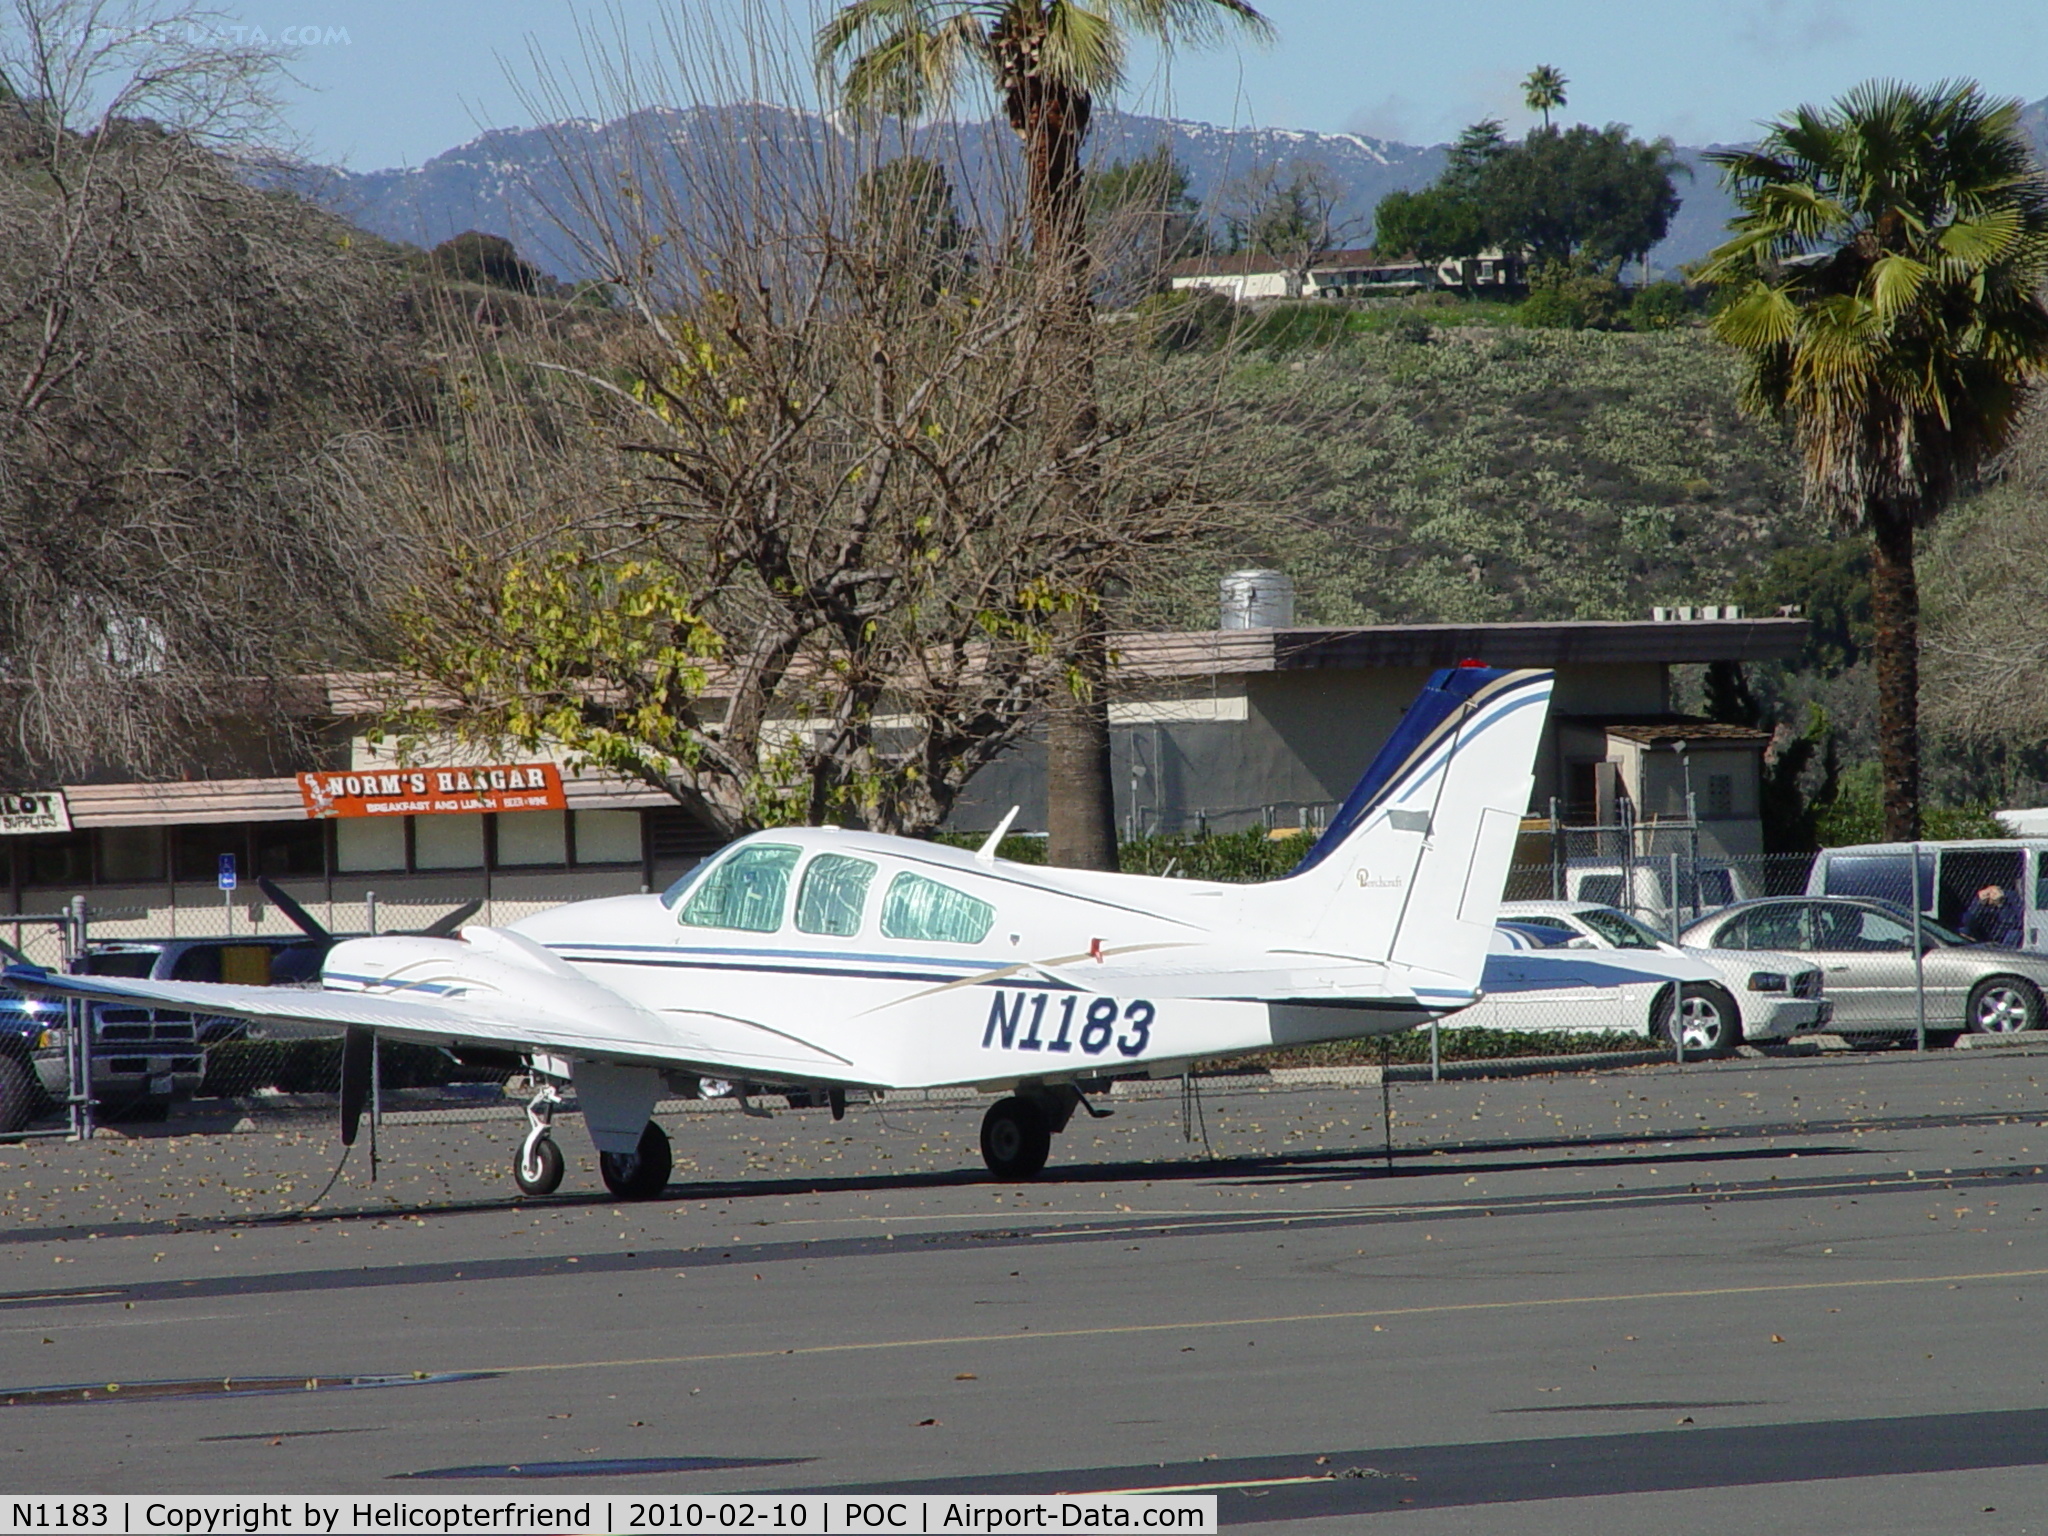 N1183, 1980 Beech E-55 Baron C/N TE 1183, Parked in transient parking